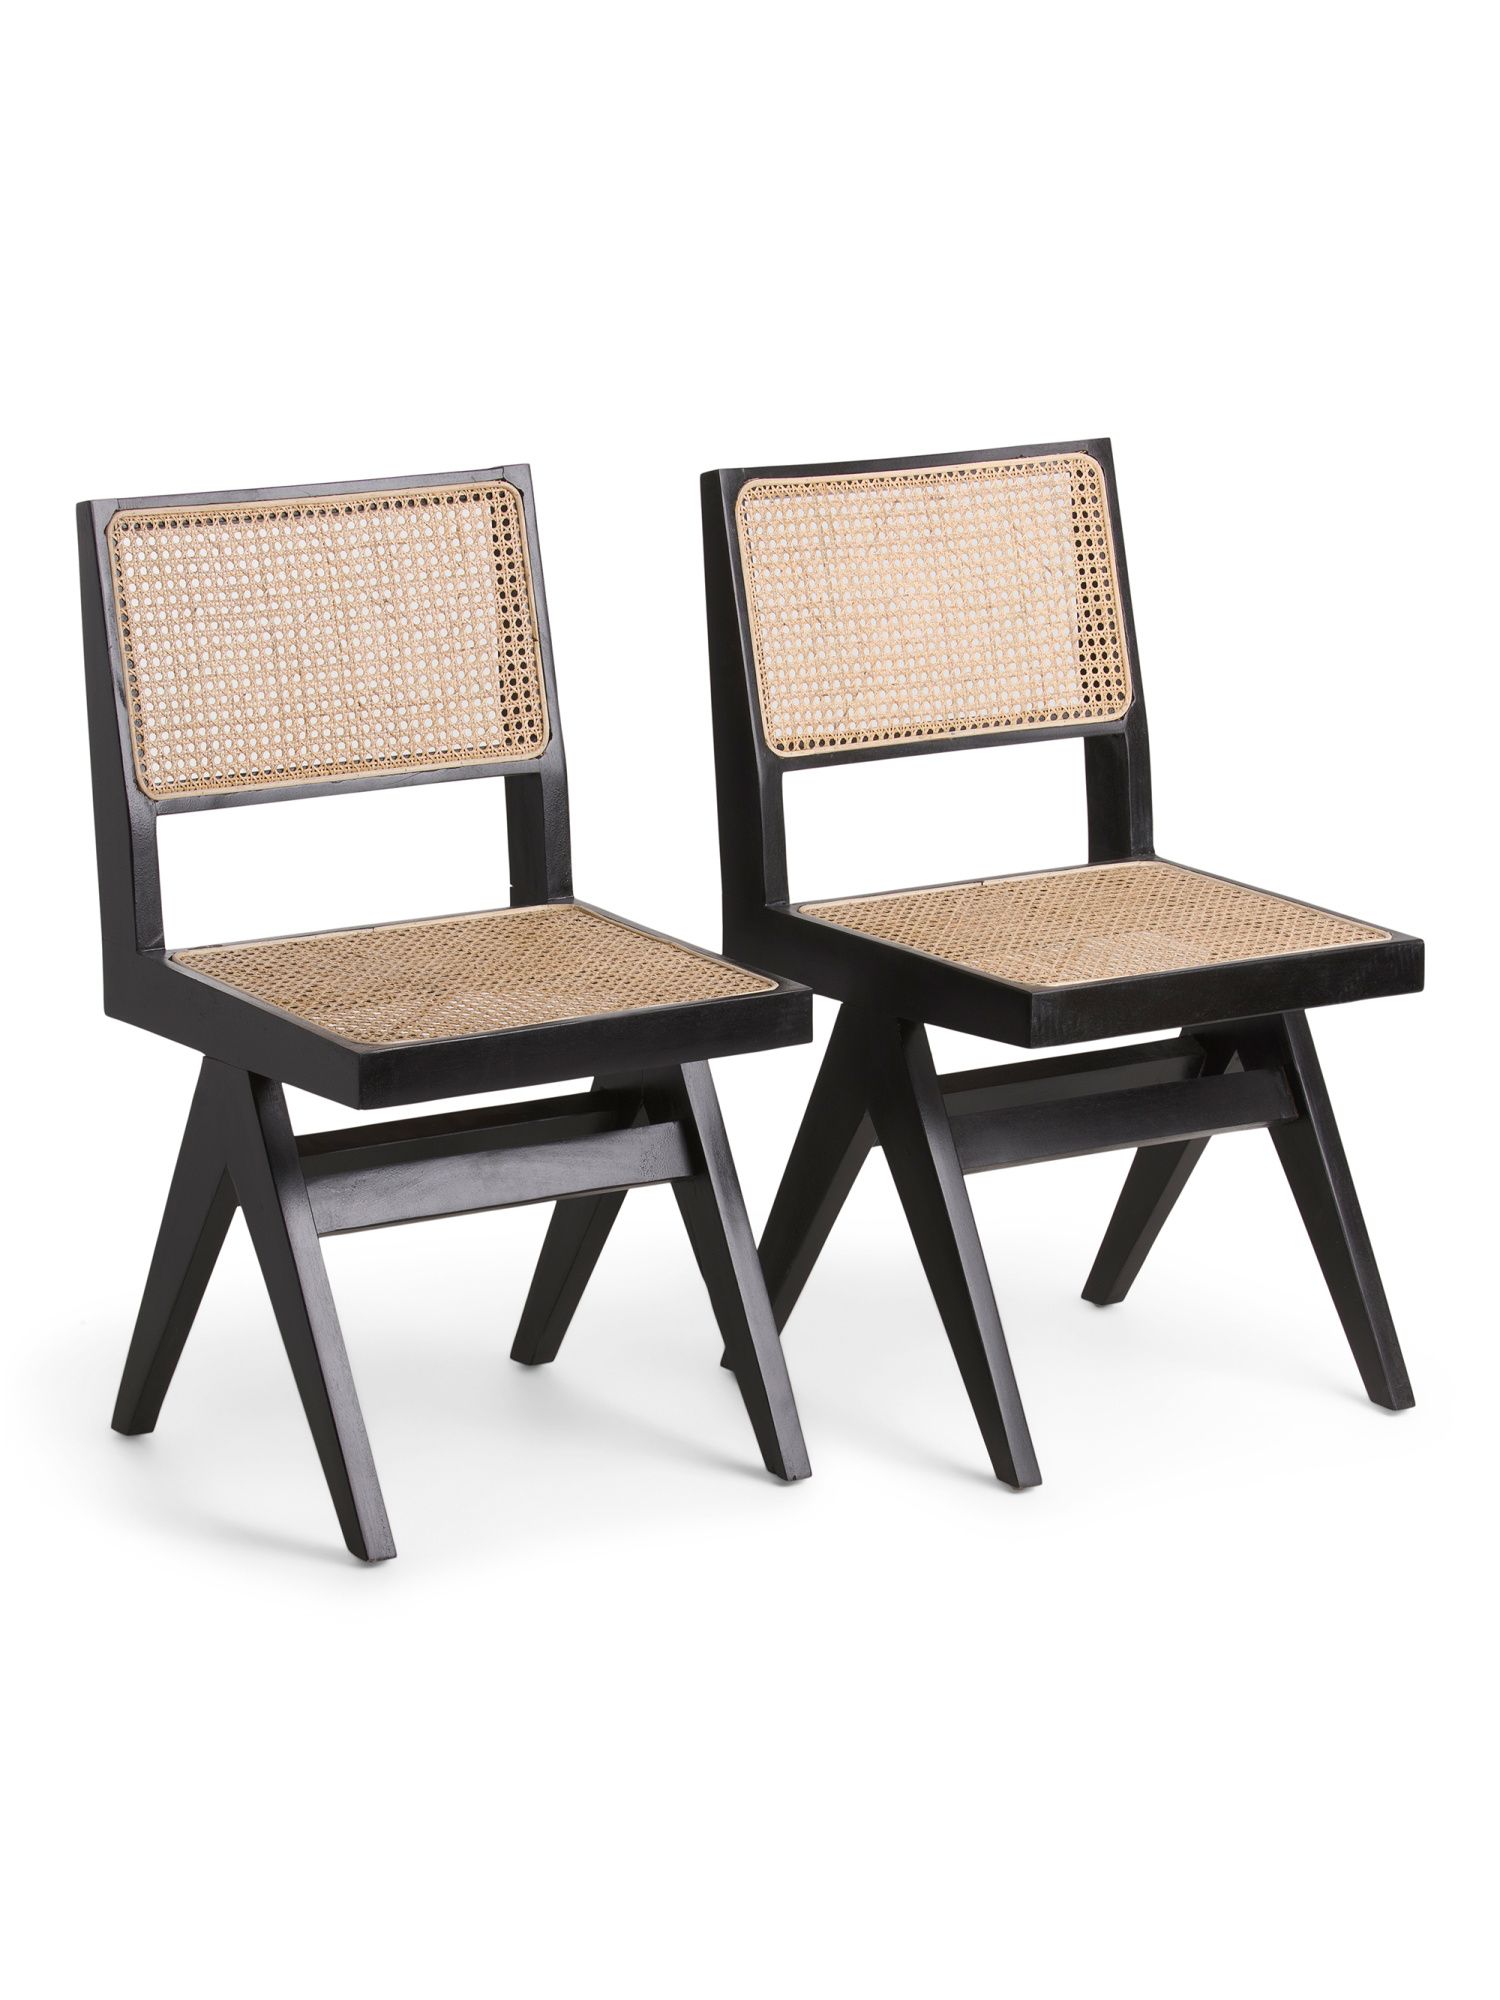 Set Of 2 Modern Cane Dining Chairs | TJ Maxx